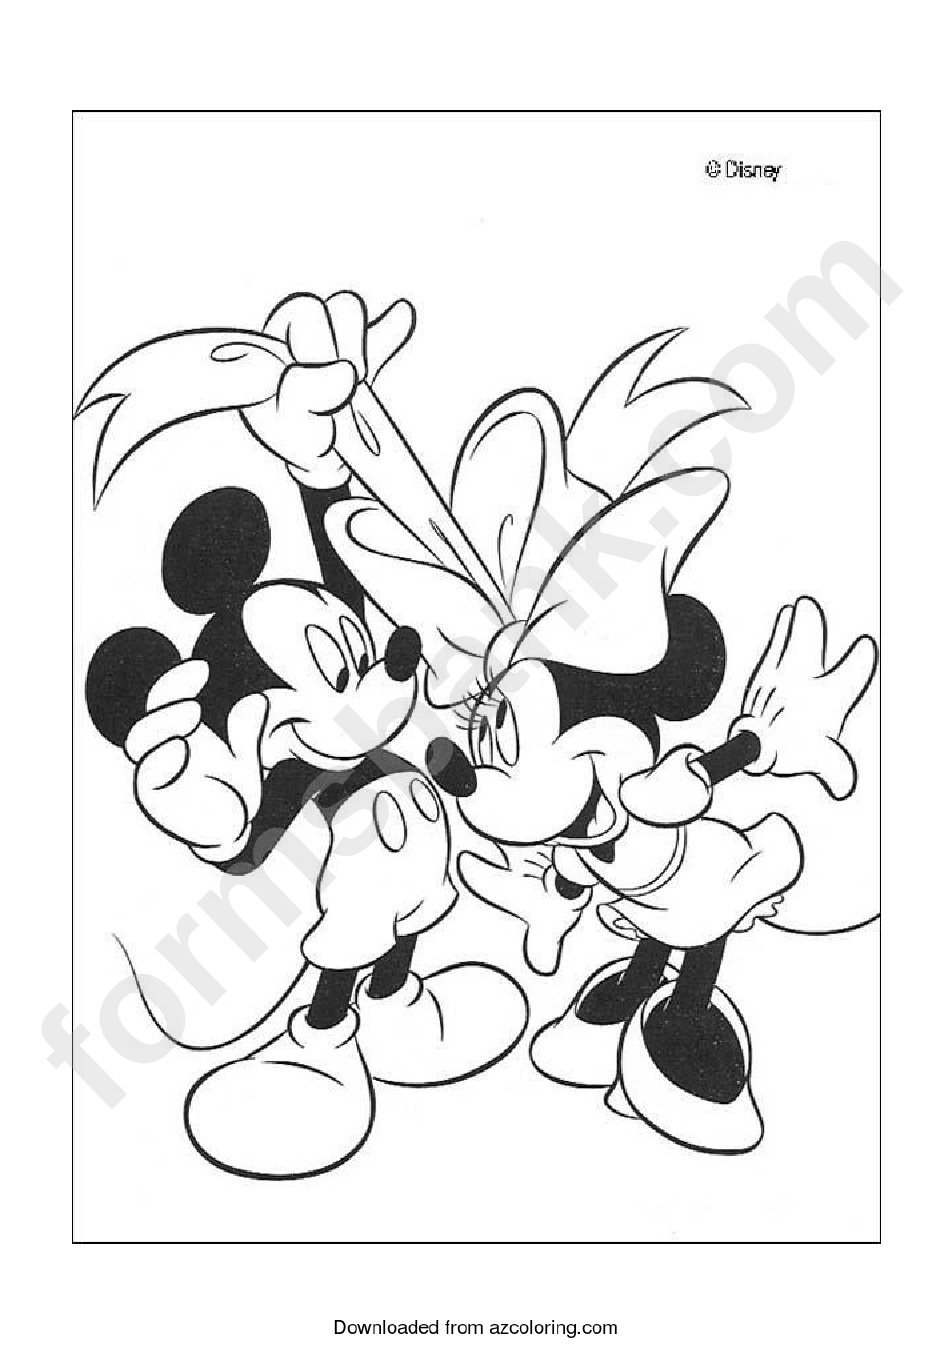 Mickey Mouse And Minnie Mouse Coloring Sheet